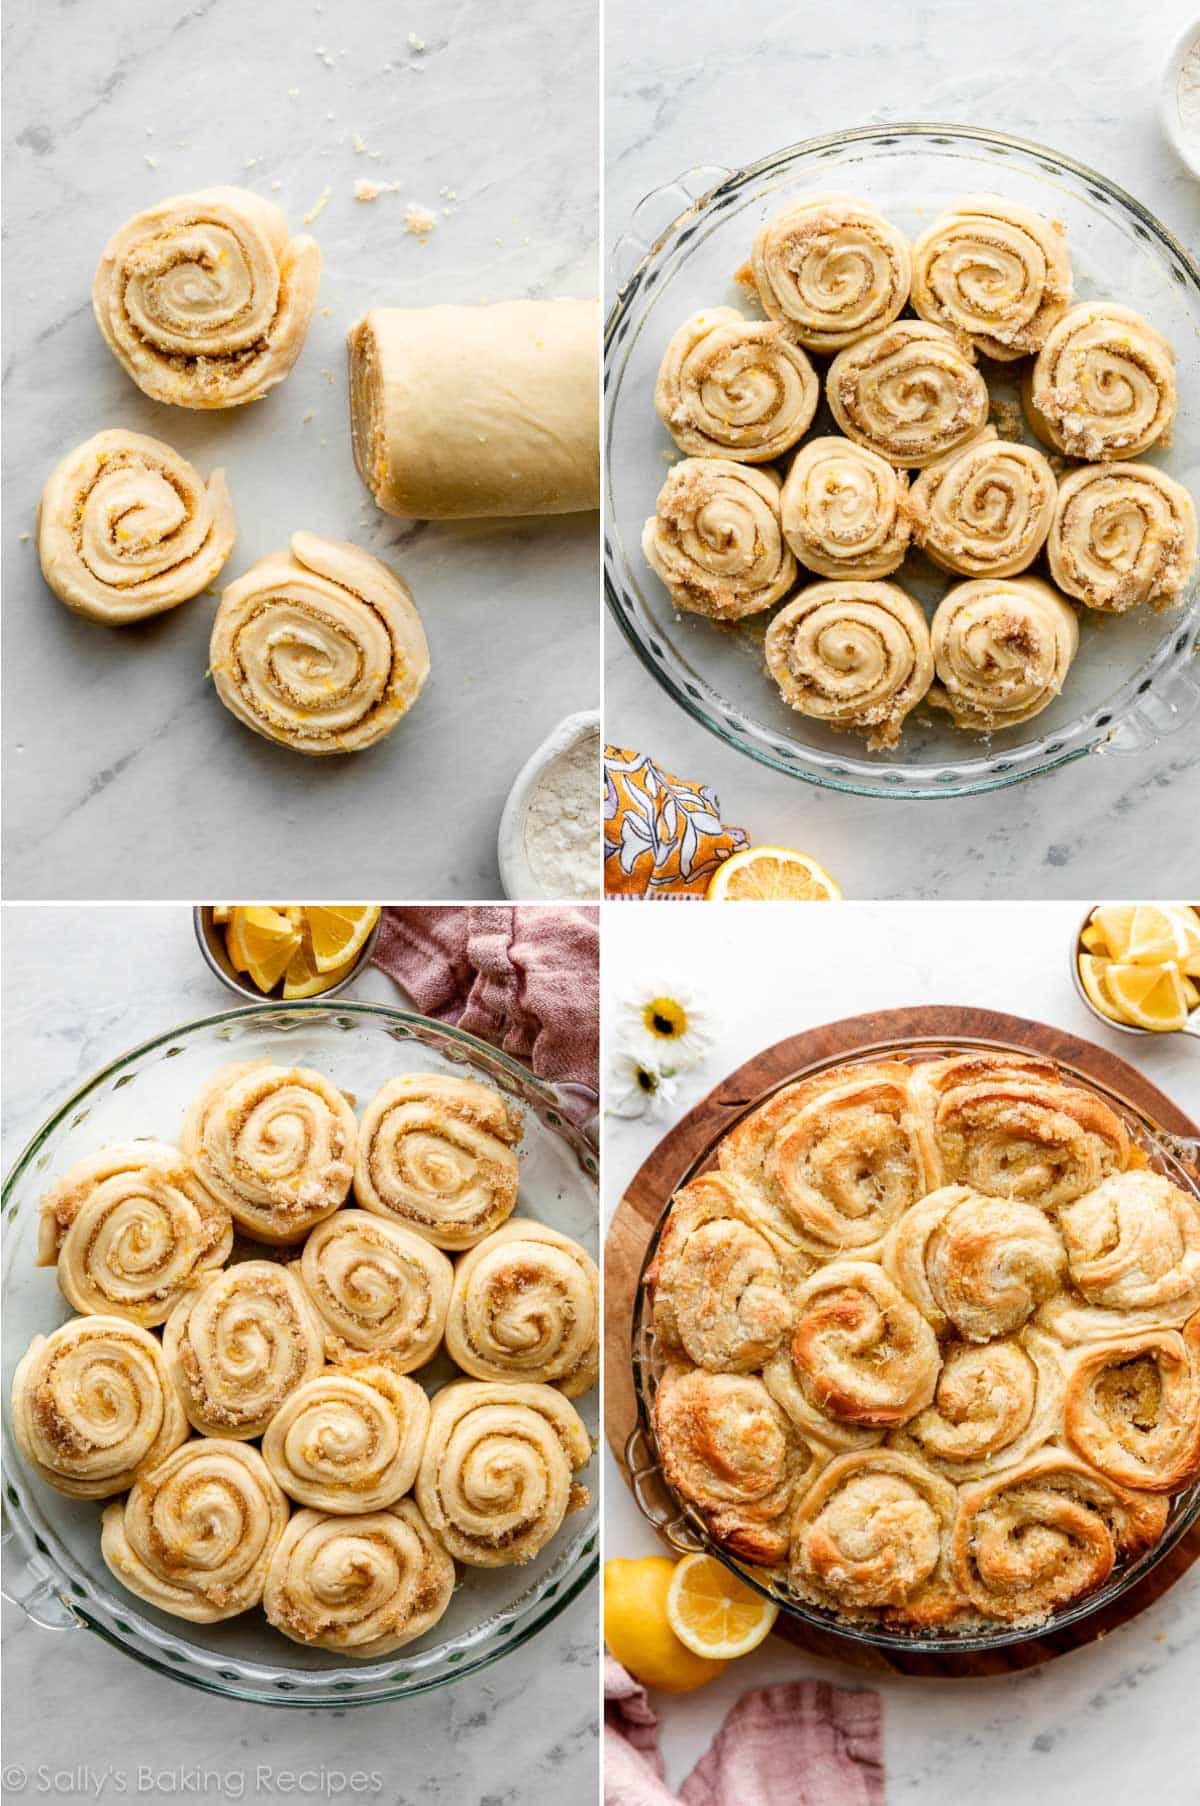 4 photo collage showing rolled up lemon sweet rolls before and after rising, and after baking.